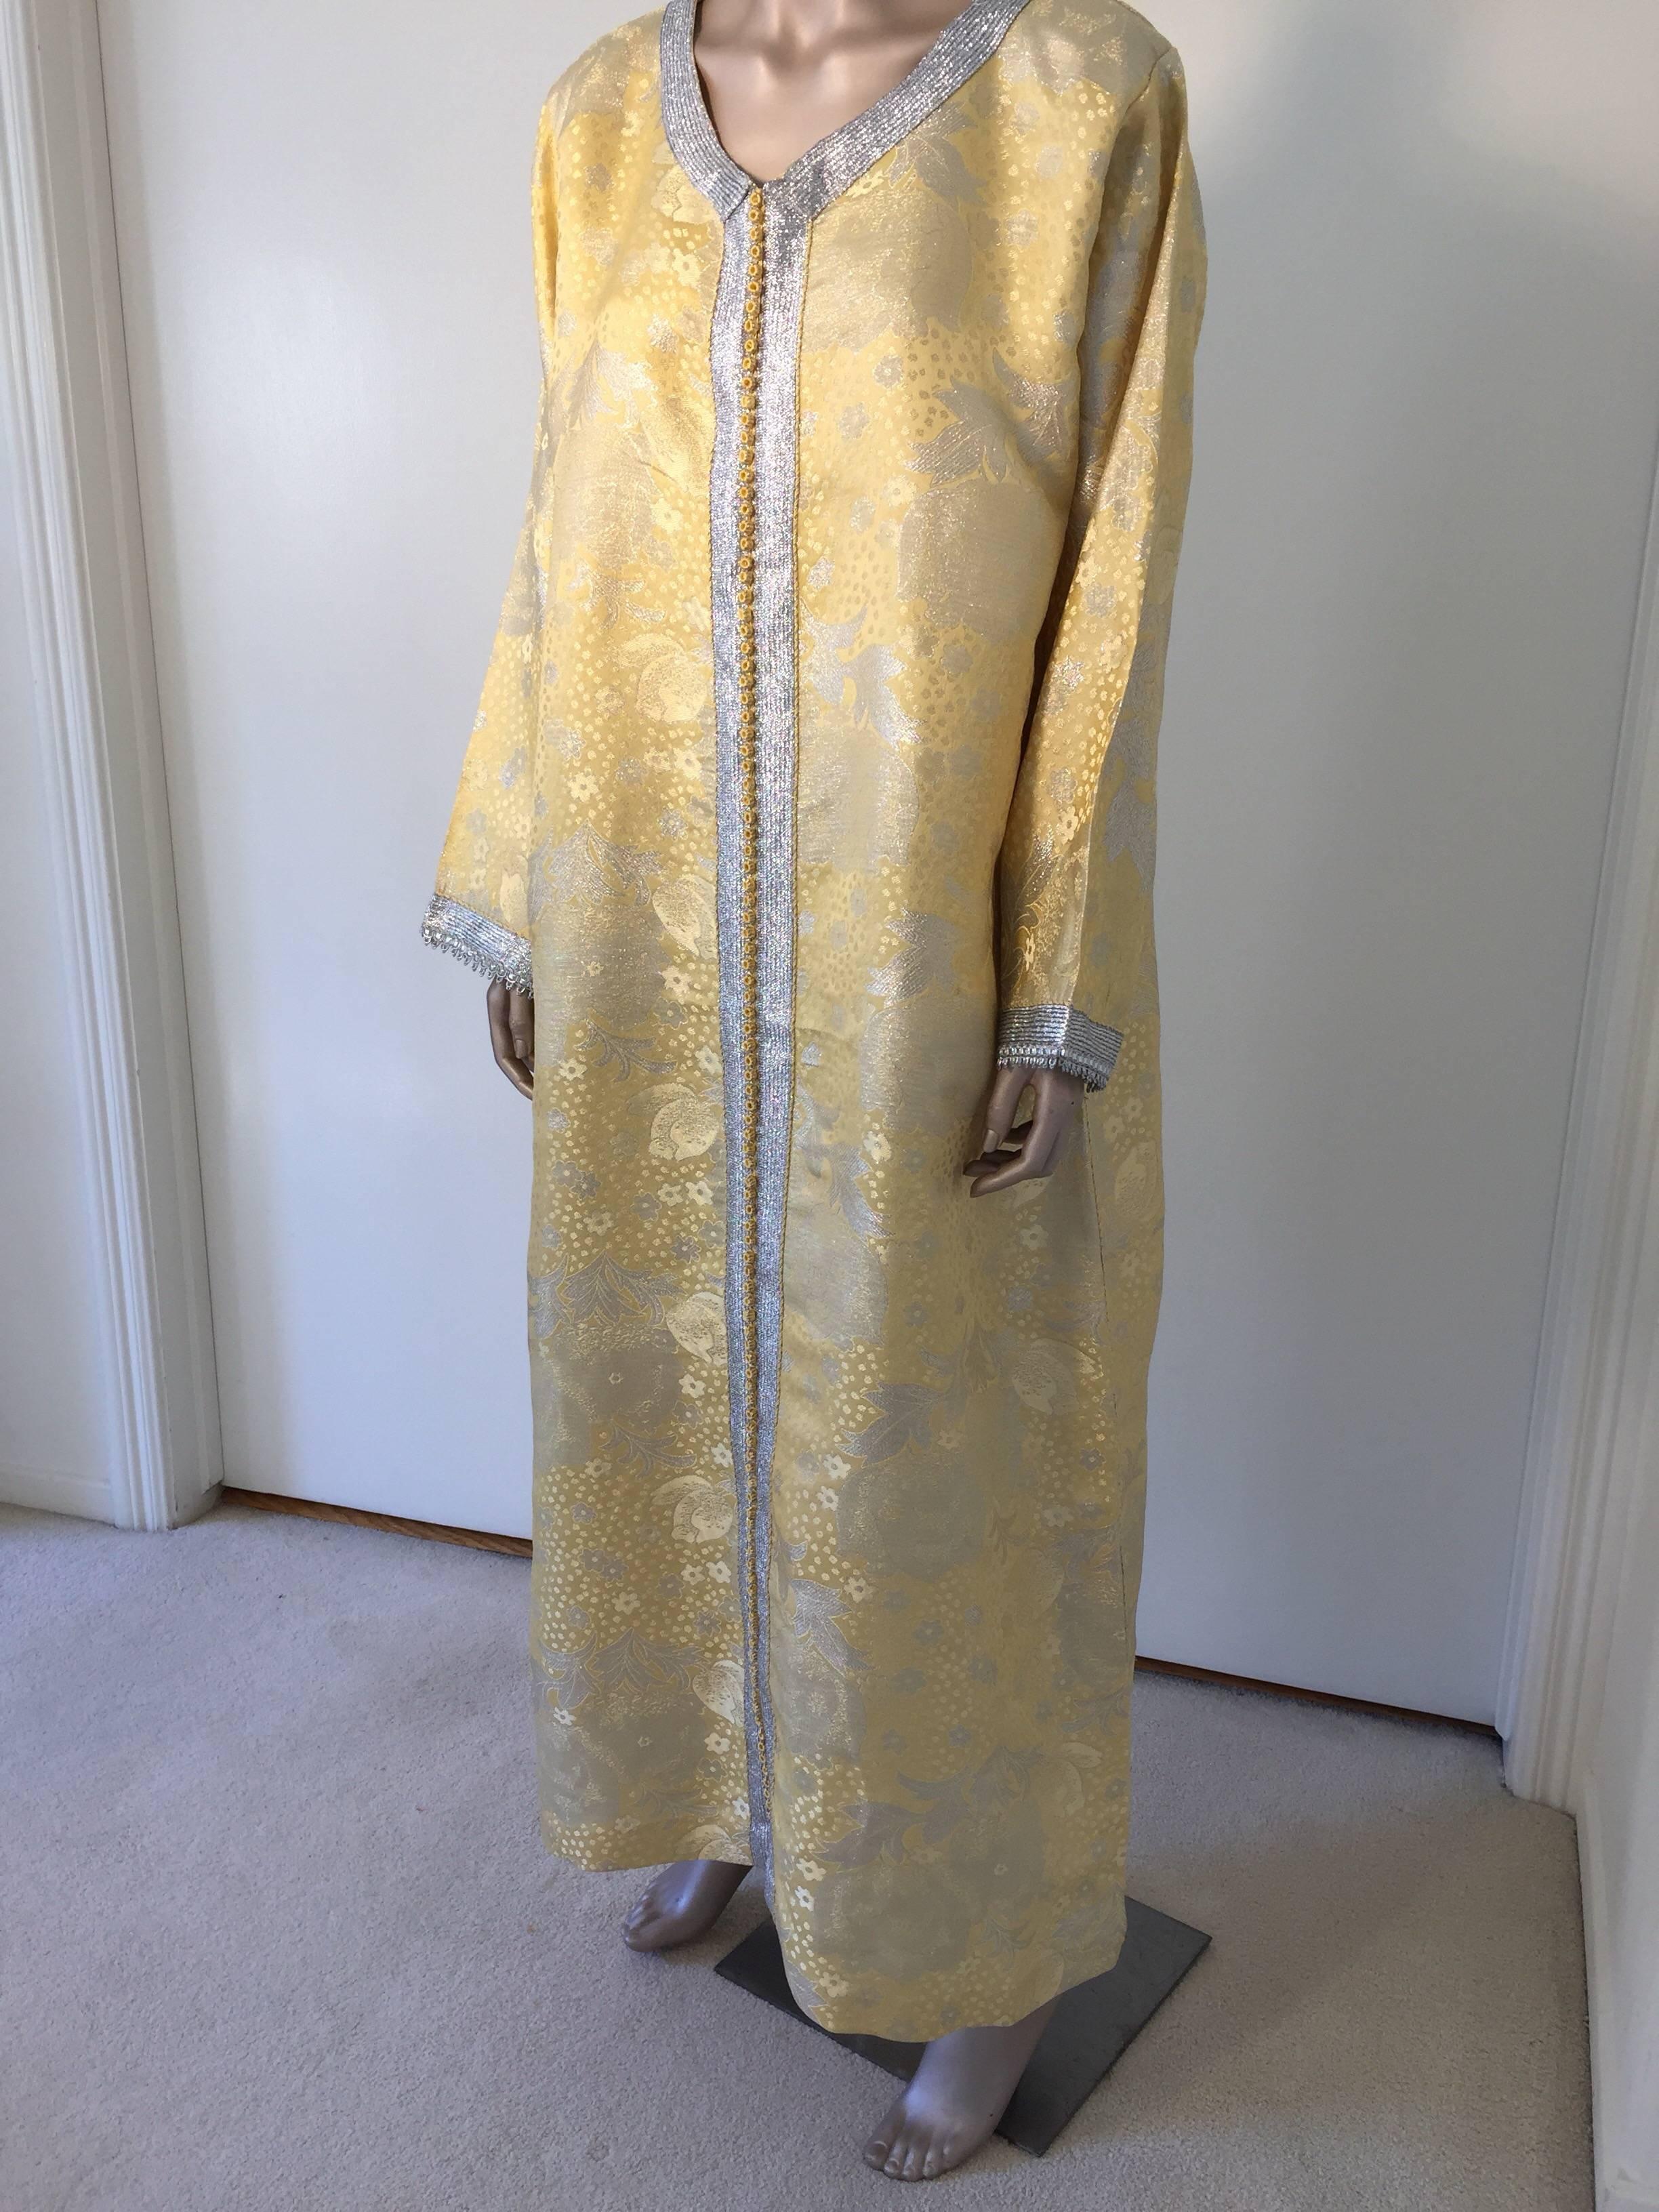 Moroccan Metallic Gold and Silver Brocade 1970s Maxi Dress Caftan, Evening Gown Kaftan For Sale